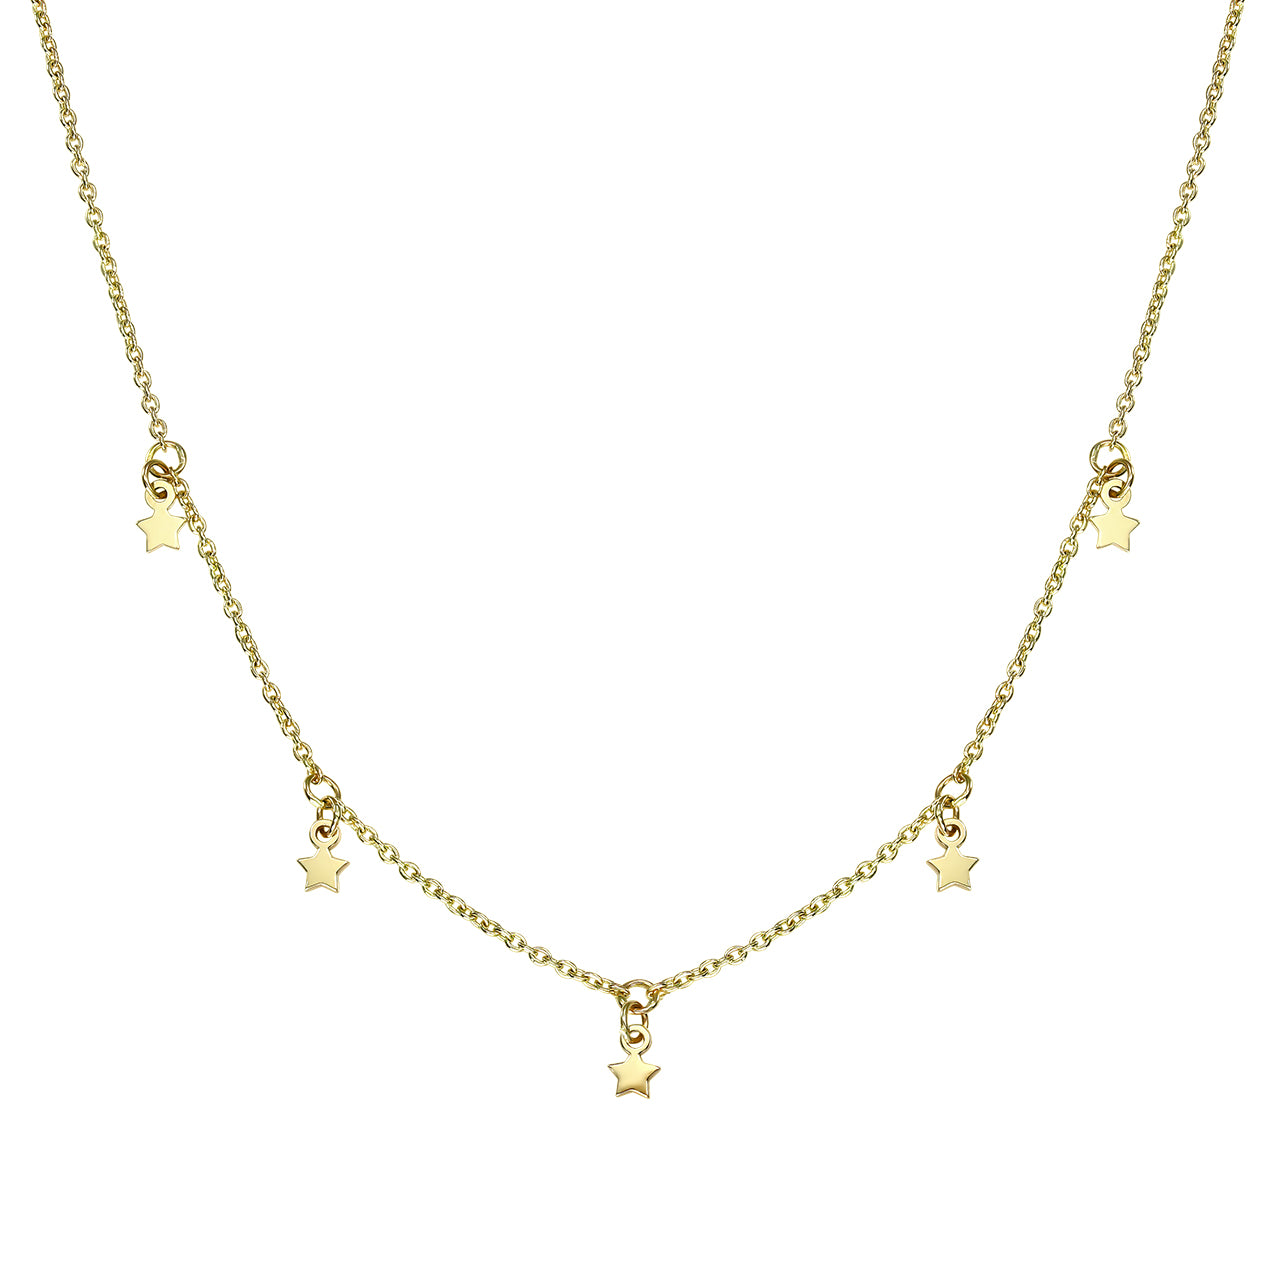 Little Stars Necklace in yellow gold 40cm - zeaetsia